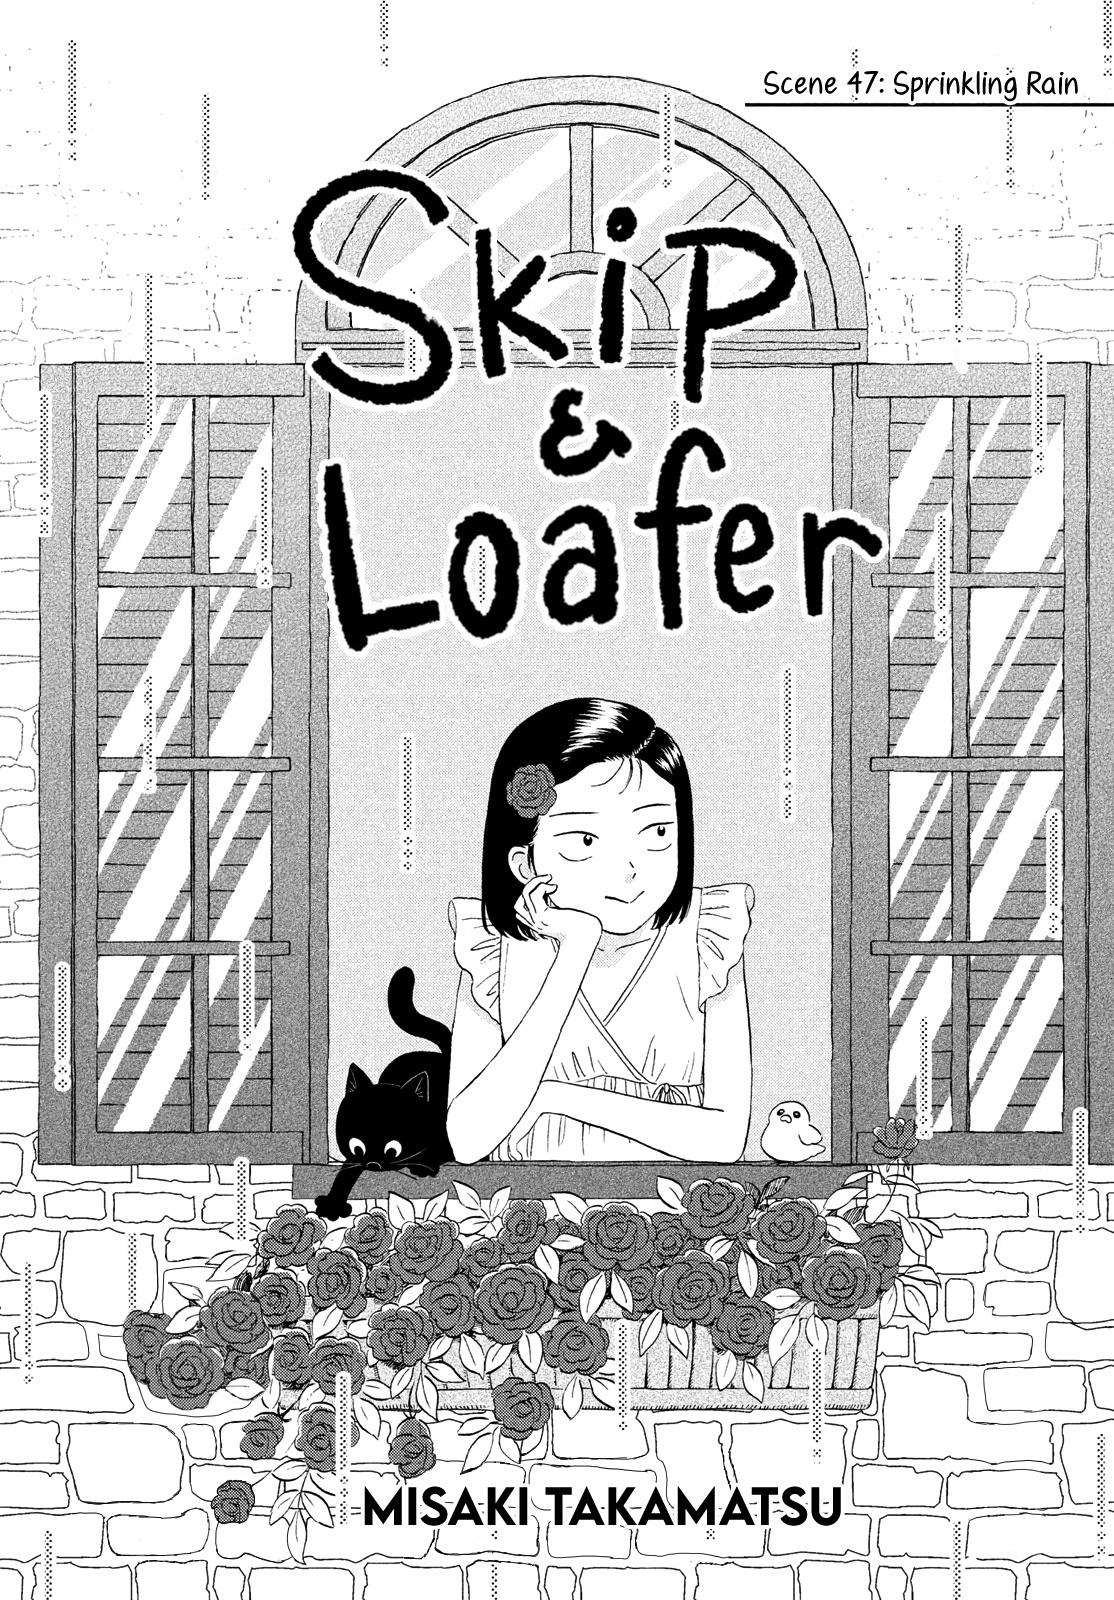 Read Skip To Loafer Chapter 22: Boisterous Culture Festival, Part